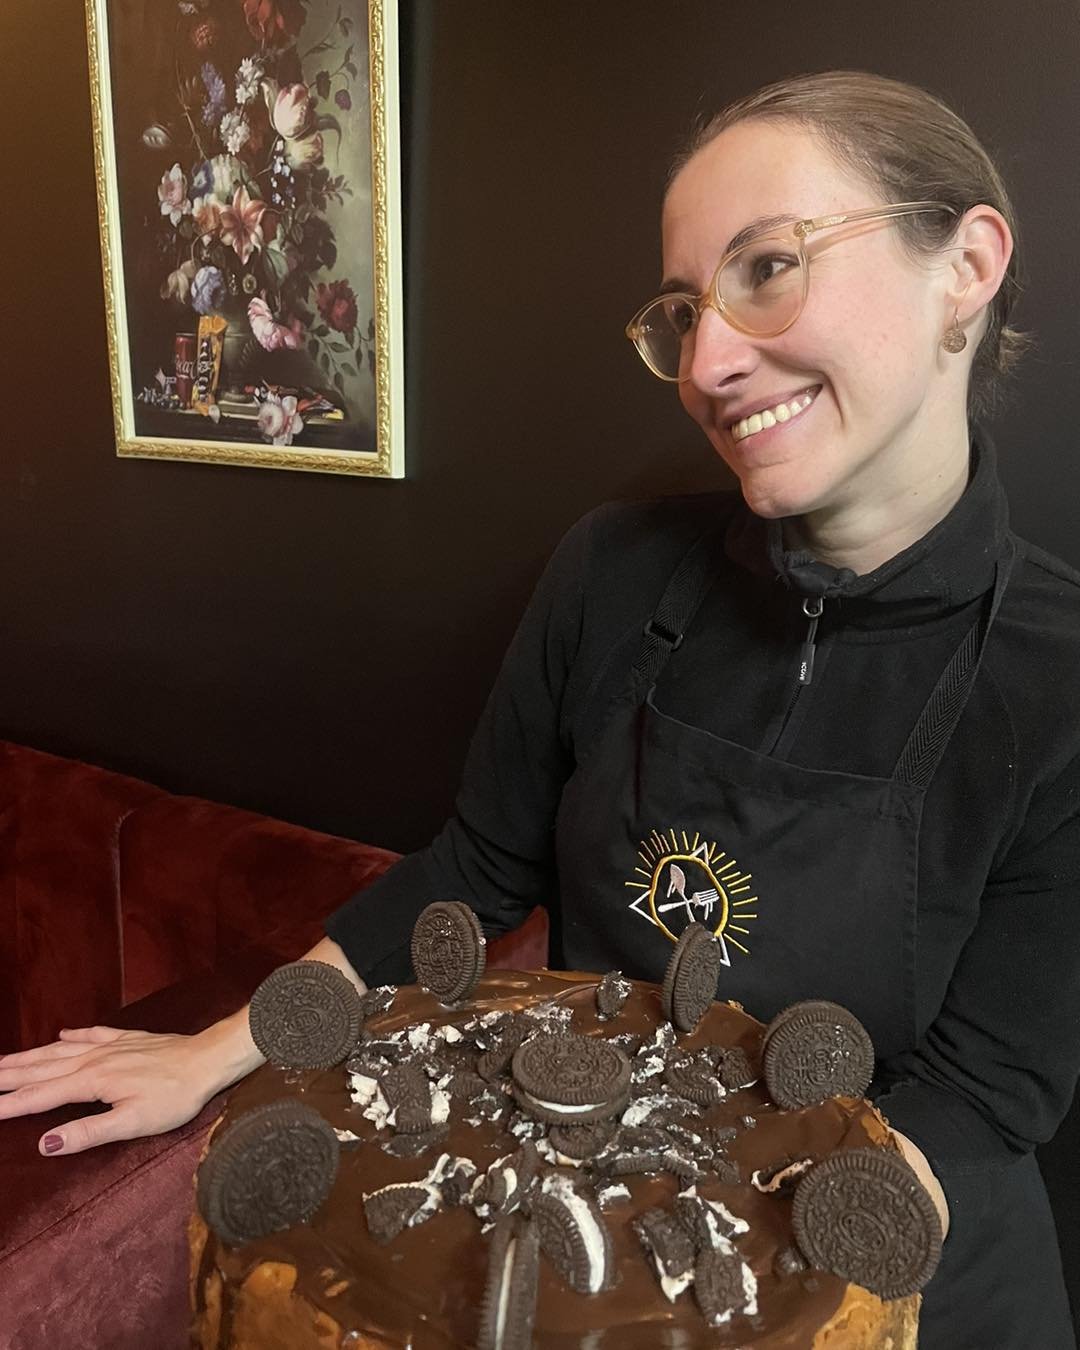 Leonie living her best Oreo baked cheesecake life ❤️

6pm til 11pm
101 little Malop st